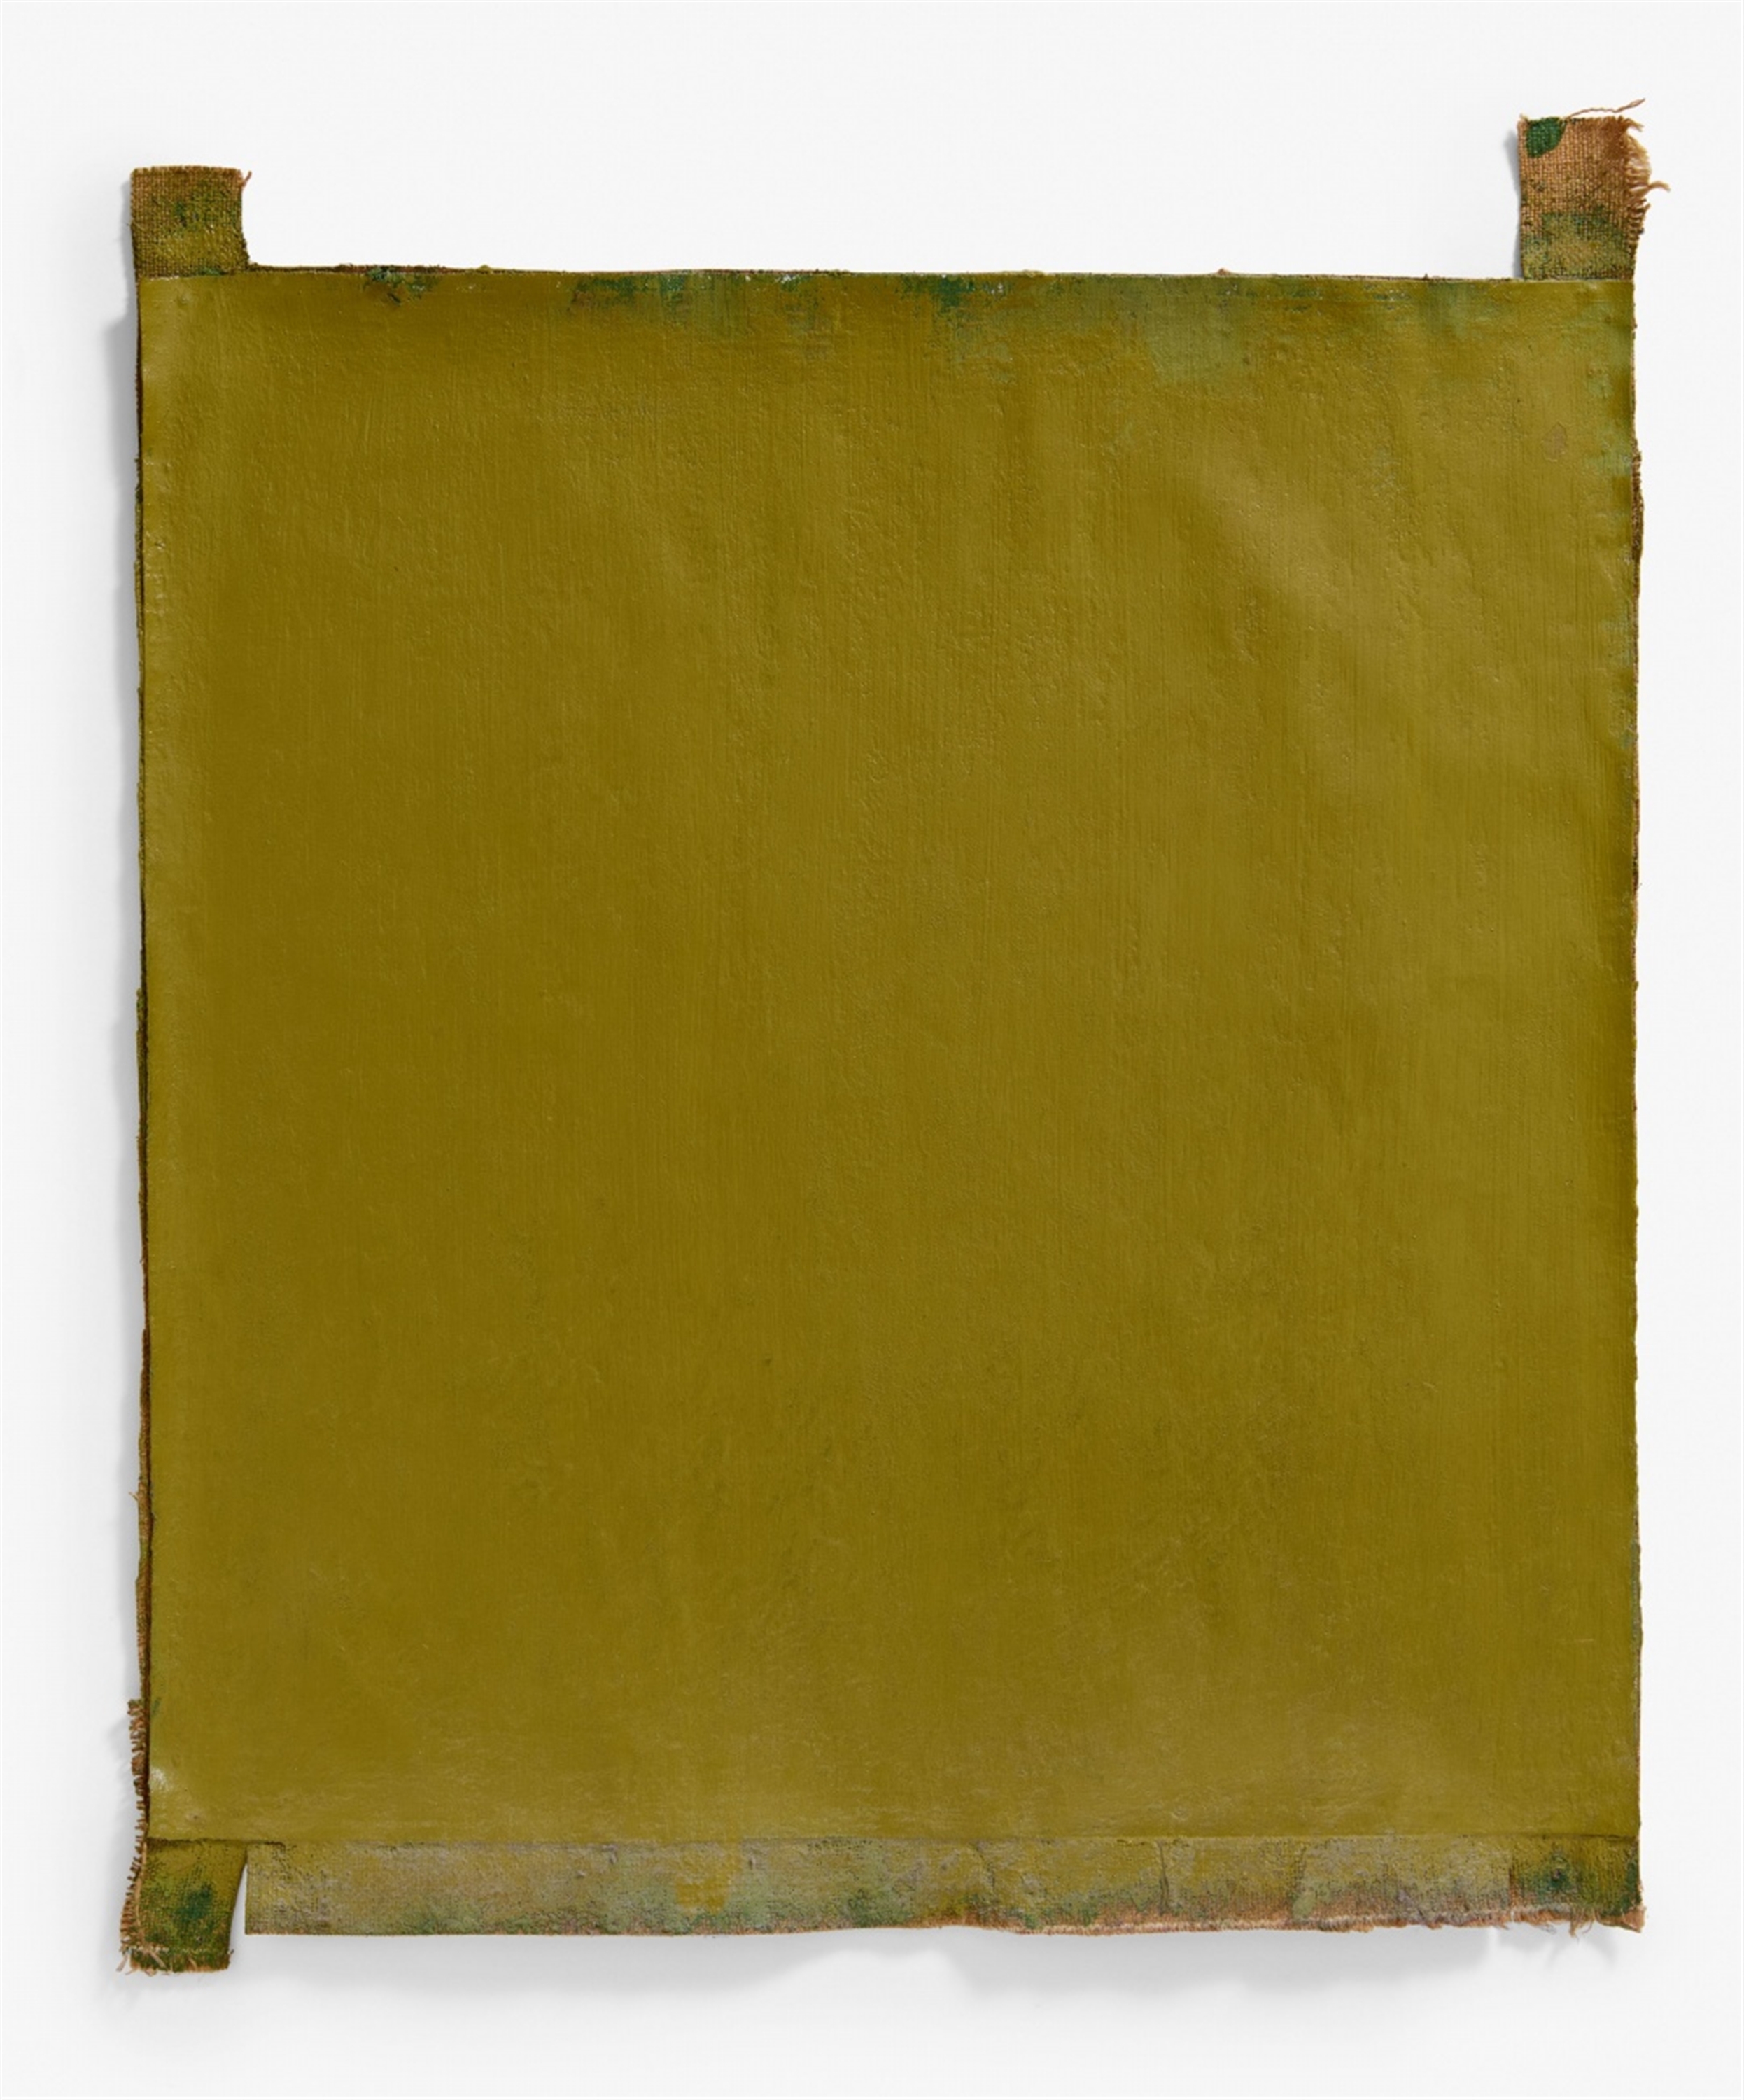 Artwork by Frederic Matys Thursz, Untitled, Made of Oil on paper on burlap